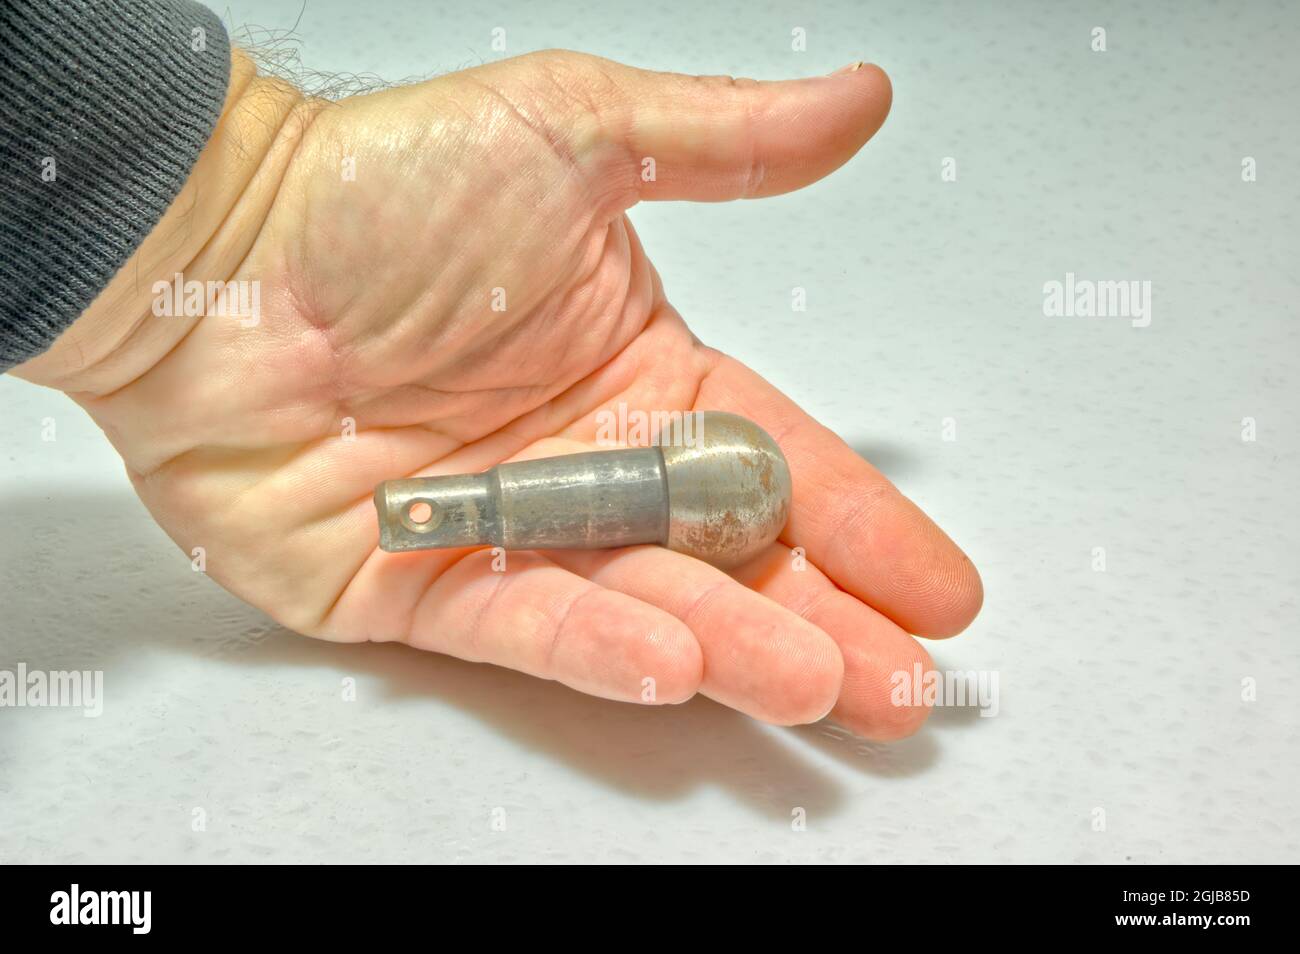 An unfinished automotive ball joint being held in a human hand. This common car part is mostly used for steering systems and front wheel drive axles. Stock Photo